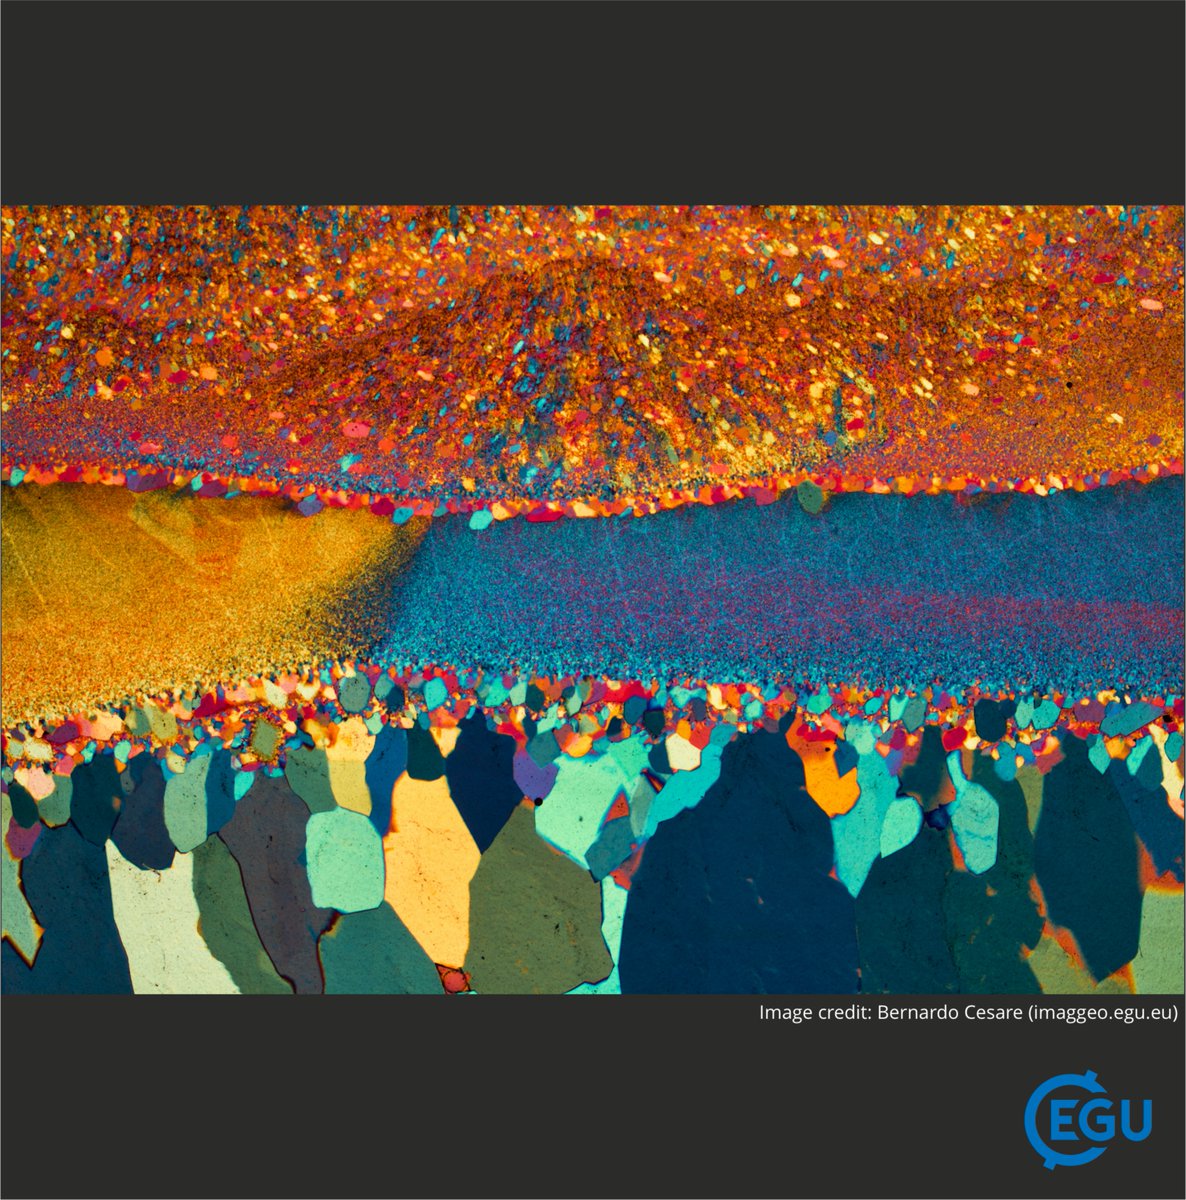 This year's #EGU24 #PhotoCompetition had so many amazing submissions it was hard for our judges to pick the Top 10! In case you missed them, we're highlighting all 10, starting with Bernardo Cesare (@micROCKScopica)'s 'The Concert'.

Read more: egu.eu/5OJV0J/